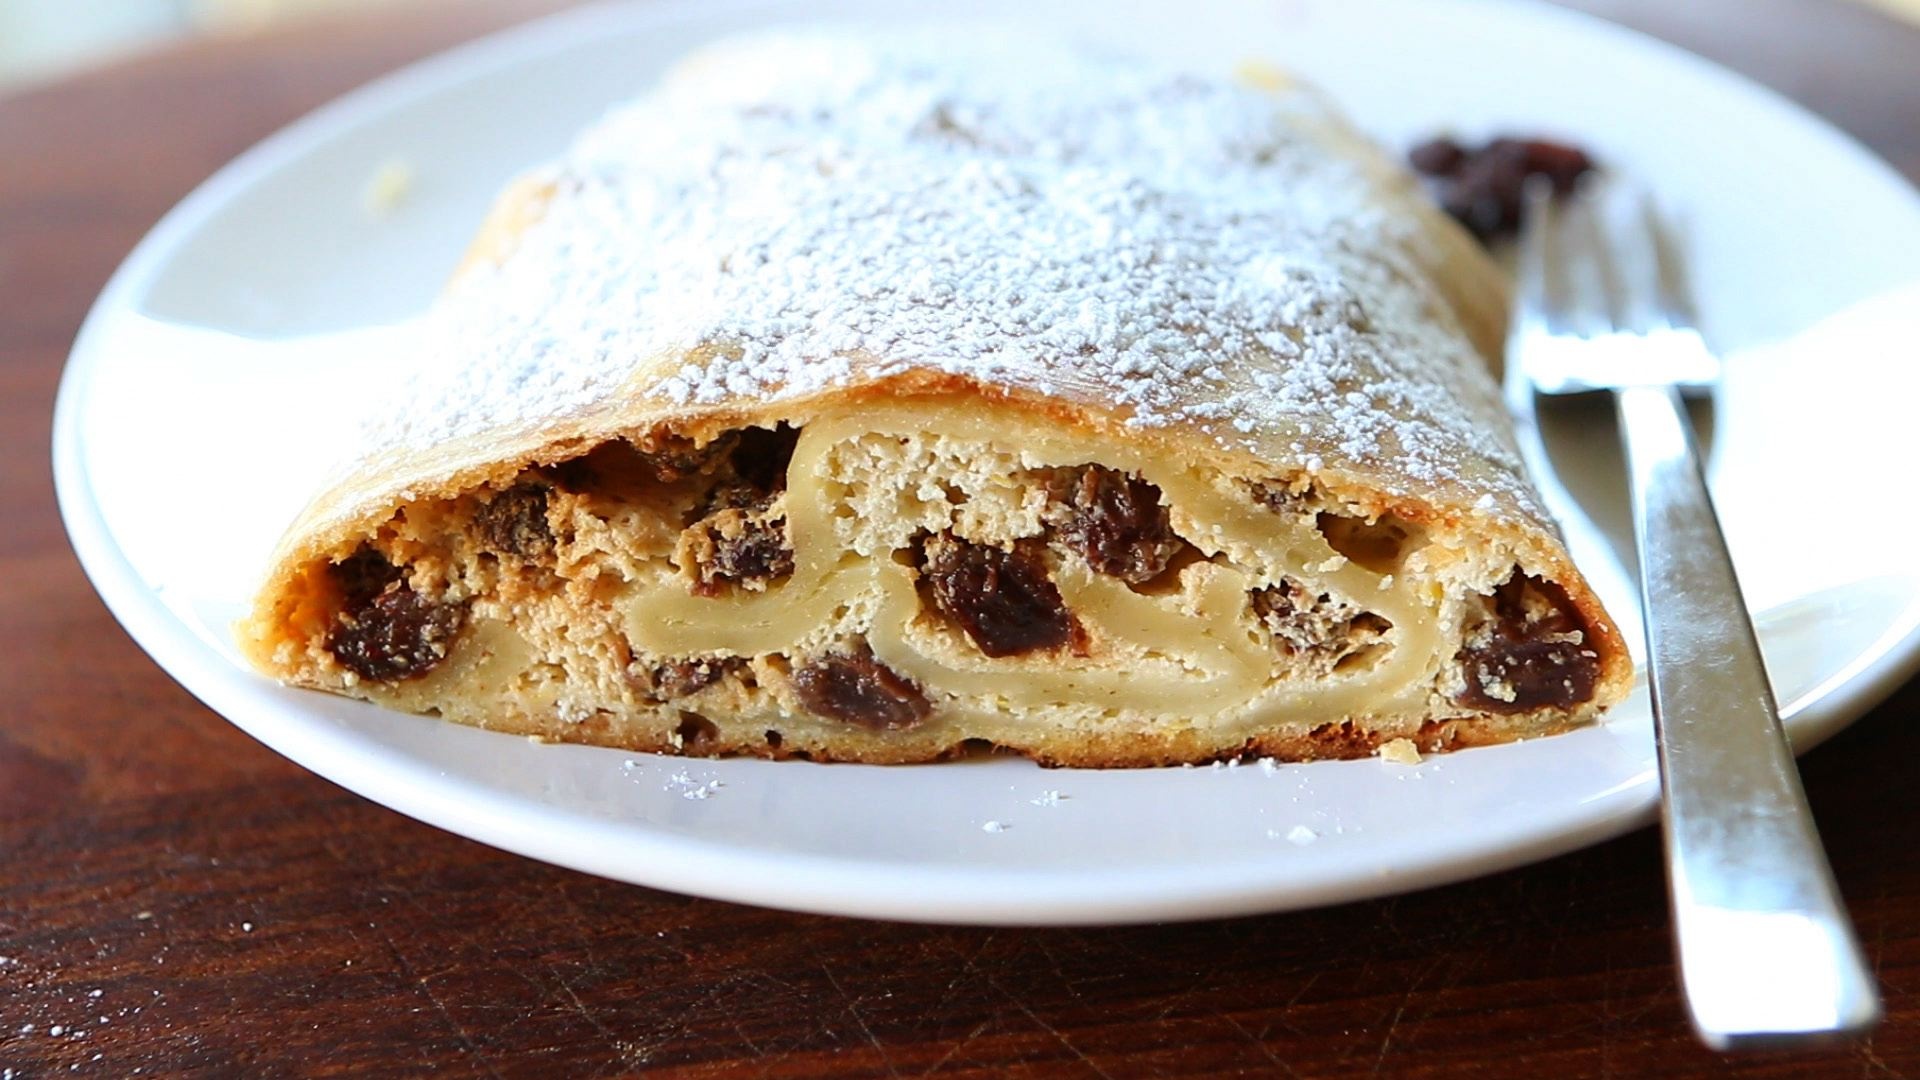 Strudel: Served in slices, The beautiful layers of dough and filling. 1920x1080 Full HD Background.